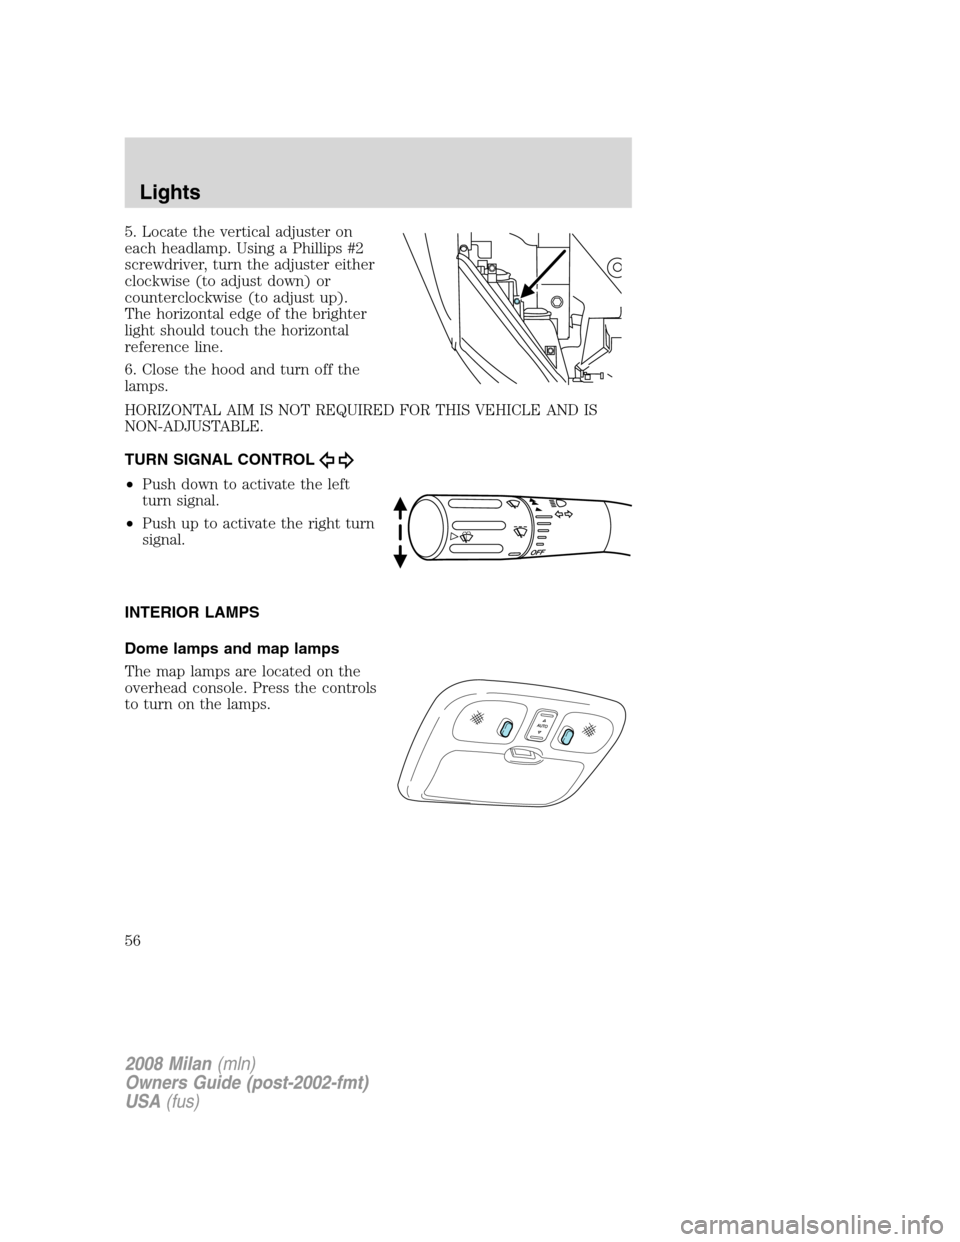 Mercury Milan 2008  Owners Manuals 5. Locate the vertical adjuster on
each headlamp. Using a Phillips #2
screwdriver, turn the adjuster either
clockwise (to adjust down) or
counterclockwise (to adjust up).
The horizontal edge of the br